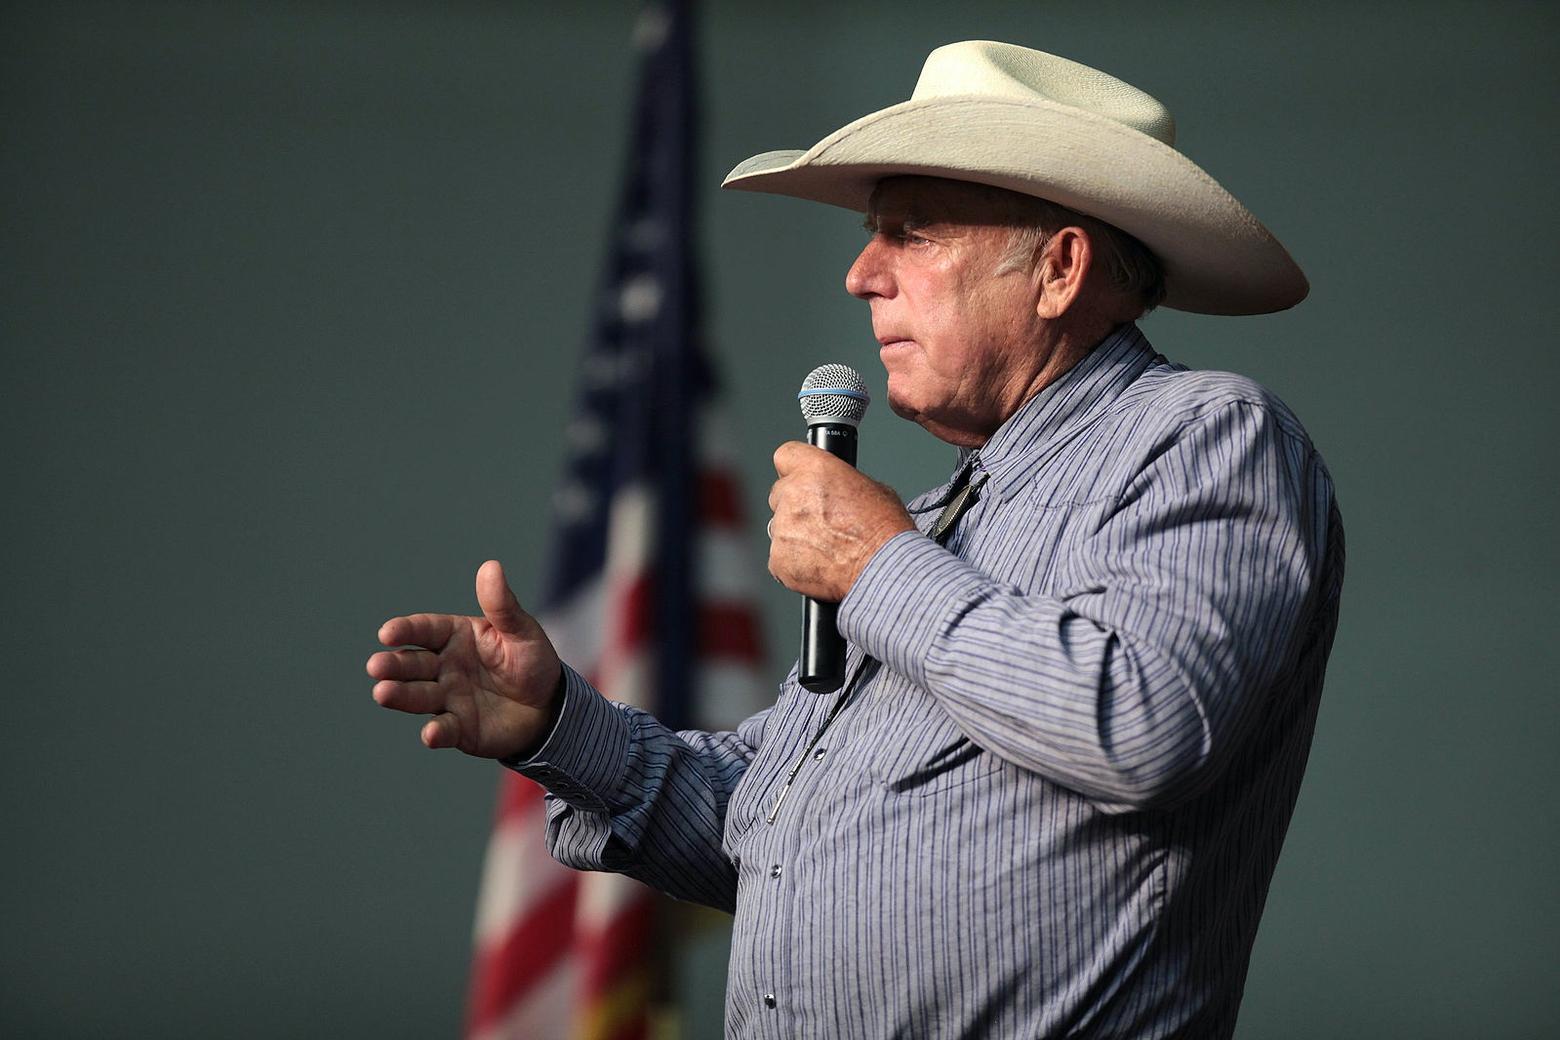 Cliven Bundy speaking at a forum hosted by the American Academy for Constitutional Education at the Burke Basic School in Mesa, Arizona. Photo courtesy Gage Skidmore (www.flickr.com/people/22007612@NO5)